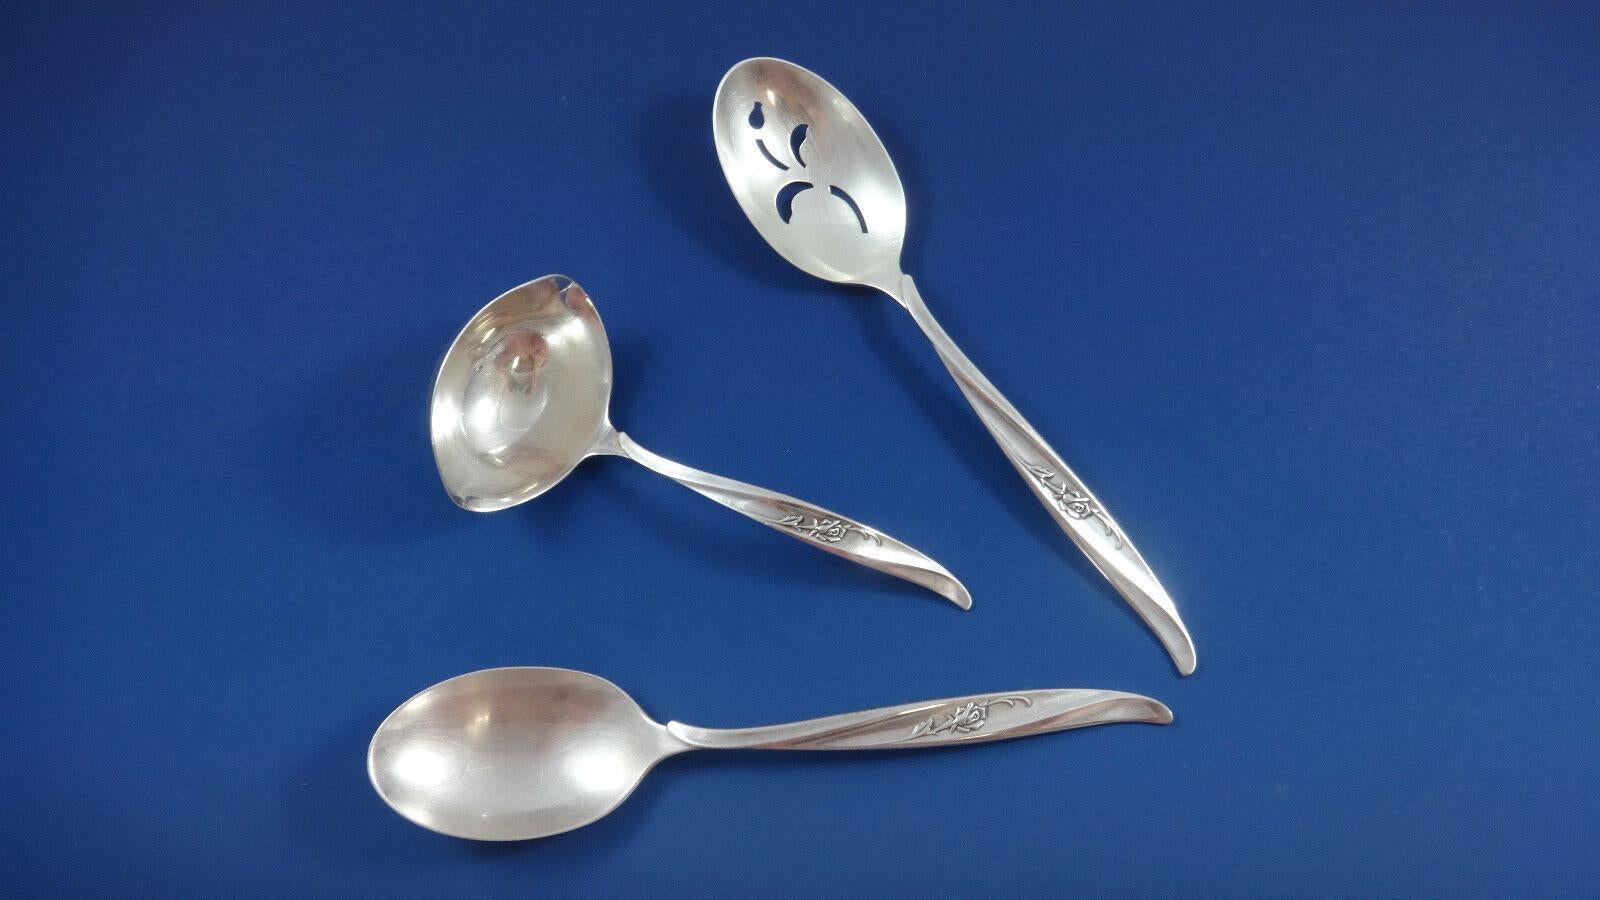 Oval Soup Spoons 6 7/8" Queen's Lace by International Sterling Silver 